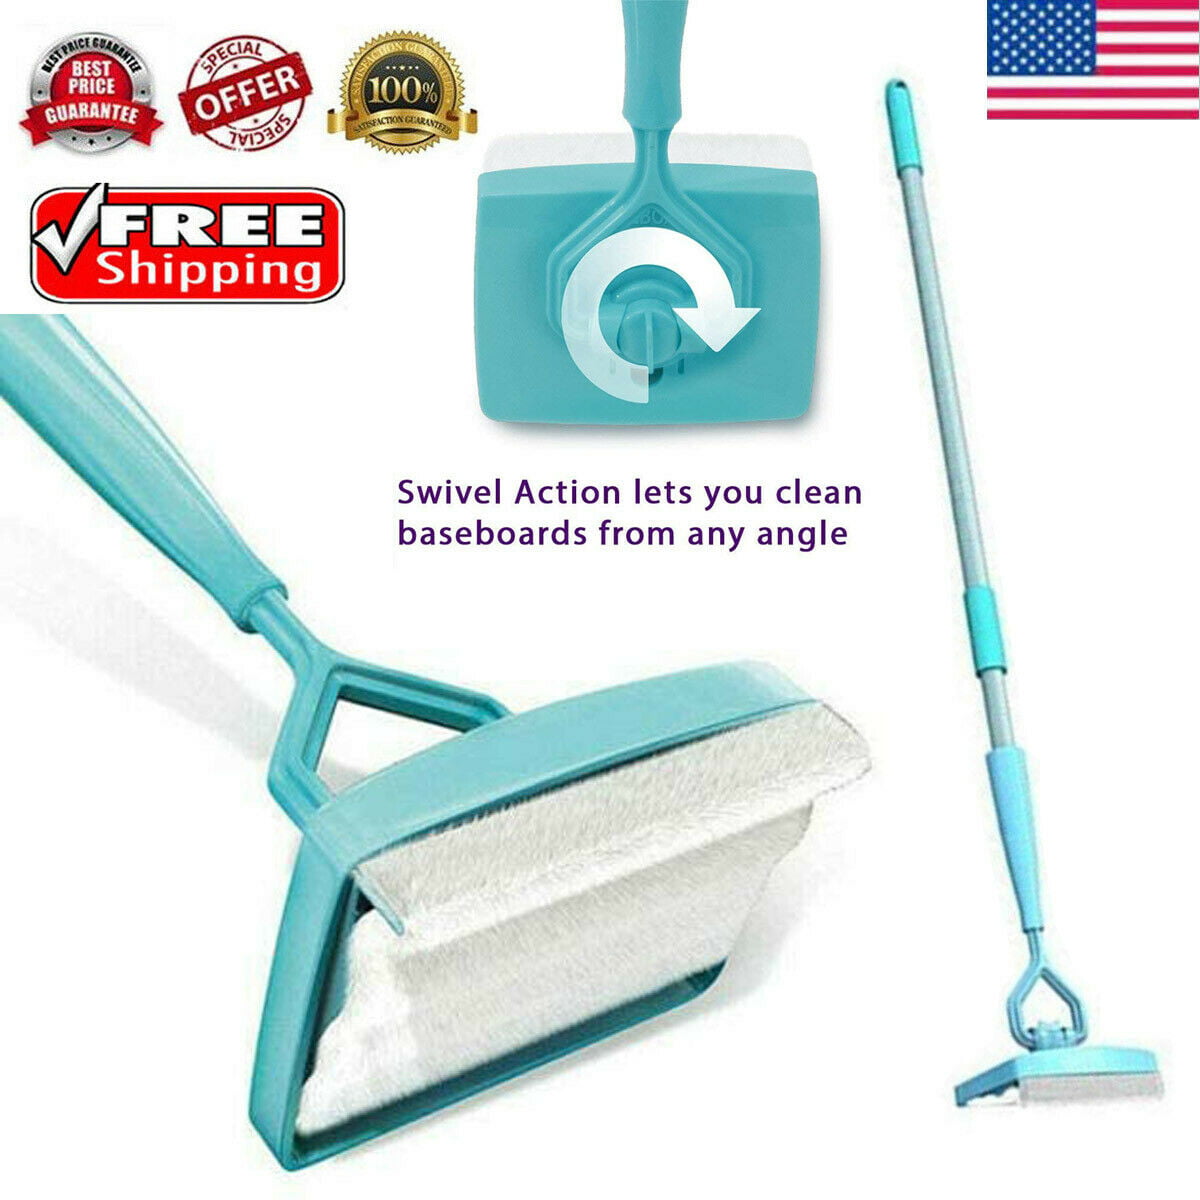 NEW Baseboard Buddy Extendable Microfiber Dust Room Cleaner Mop Multi-Function 